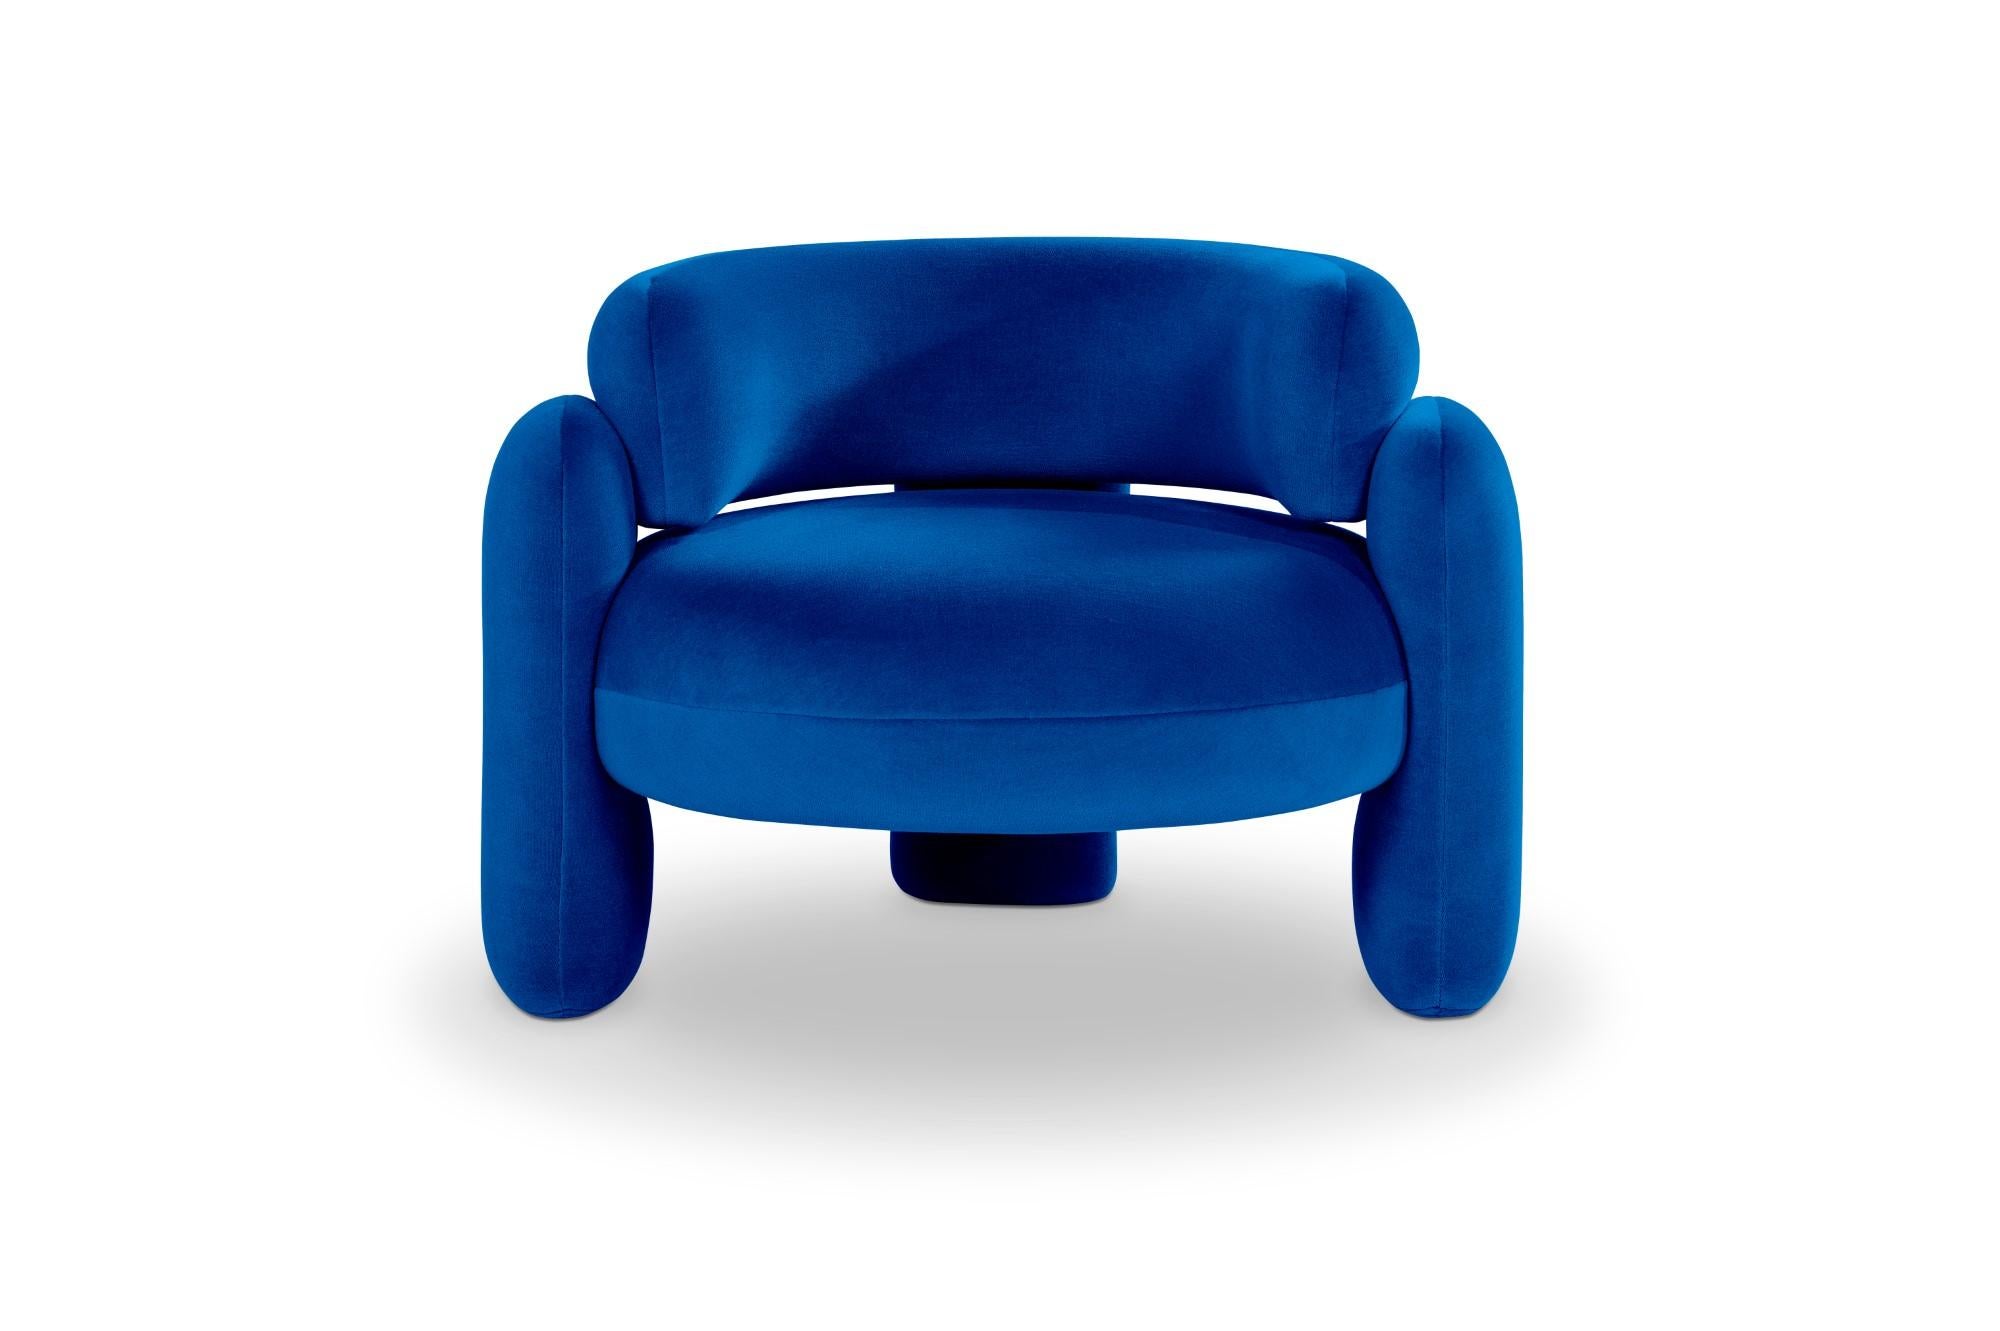 Embrace Gentle 753 armchair by Royal Stranger 
Dimensions: W 96 x D 85 x H 68 cm.
Different upholstery colors and finishes are available.
Materials: Upholstery.

Featuring an enfolding composition of geometrical shapes, the Embrace Armchair